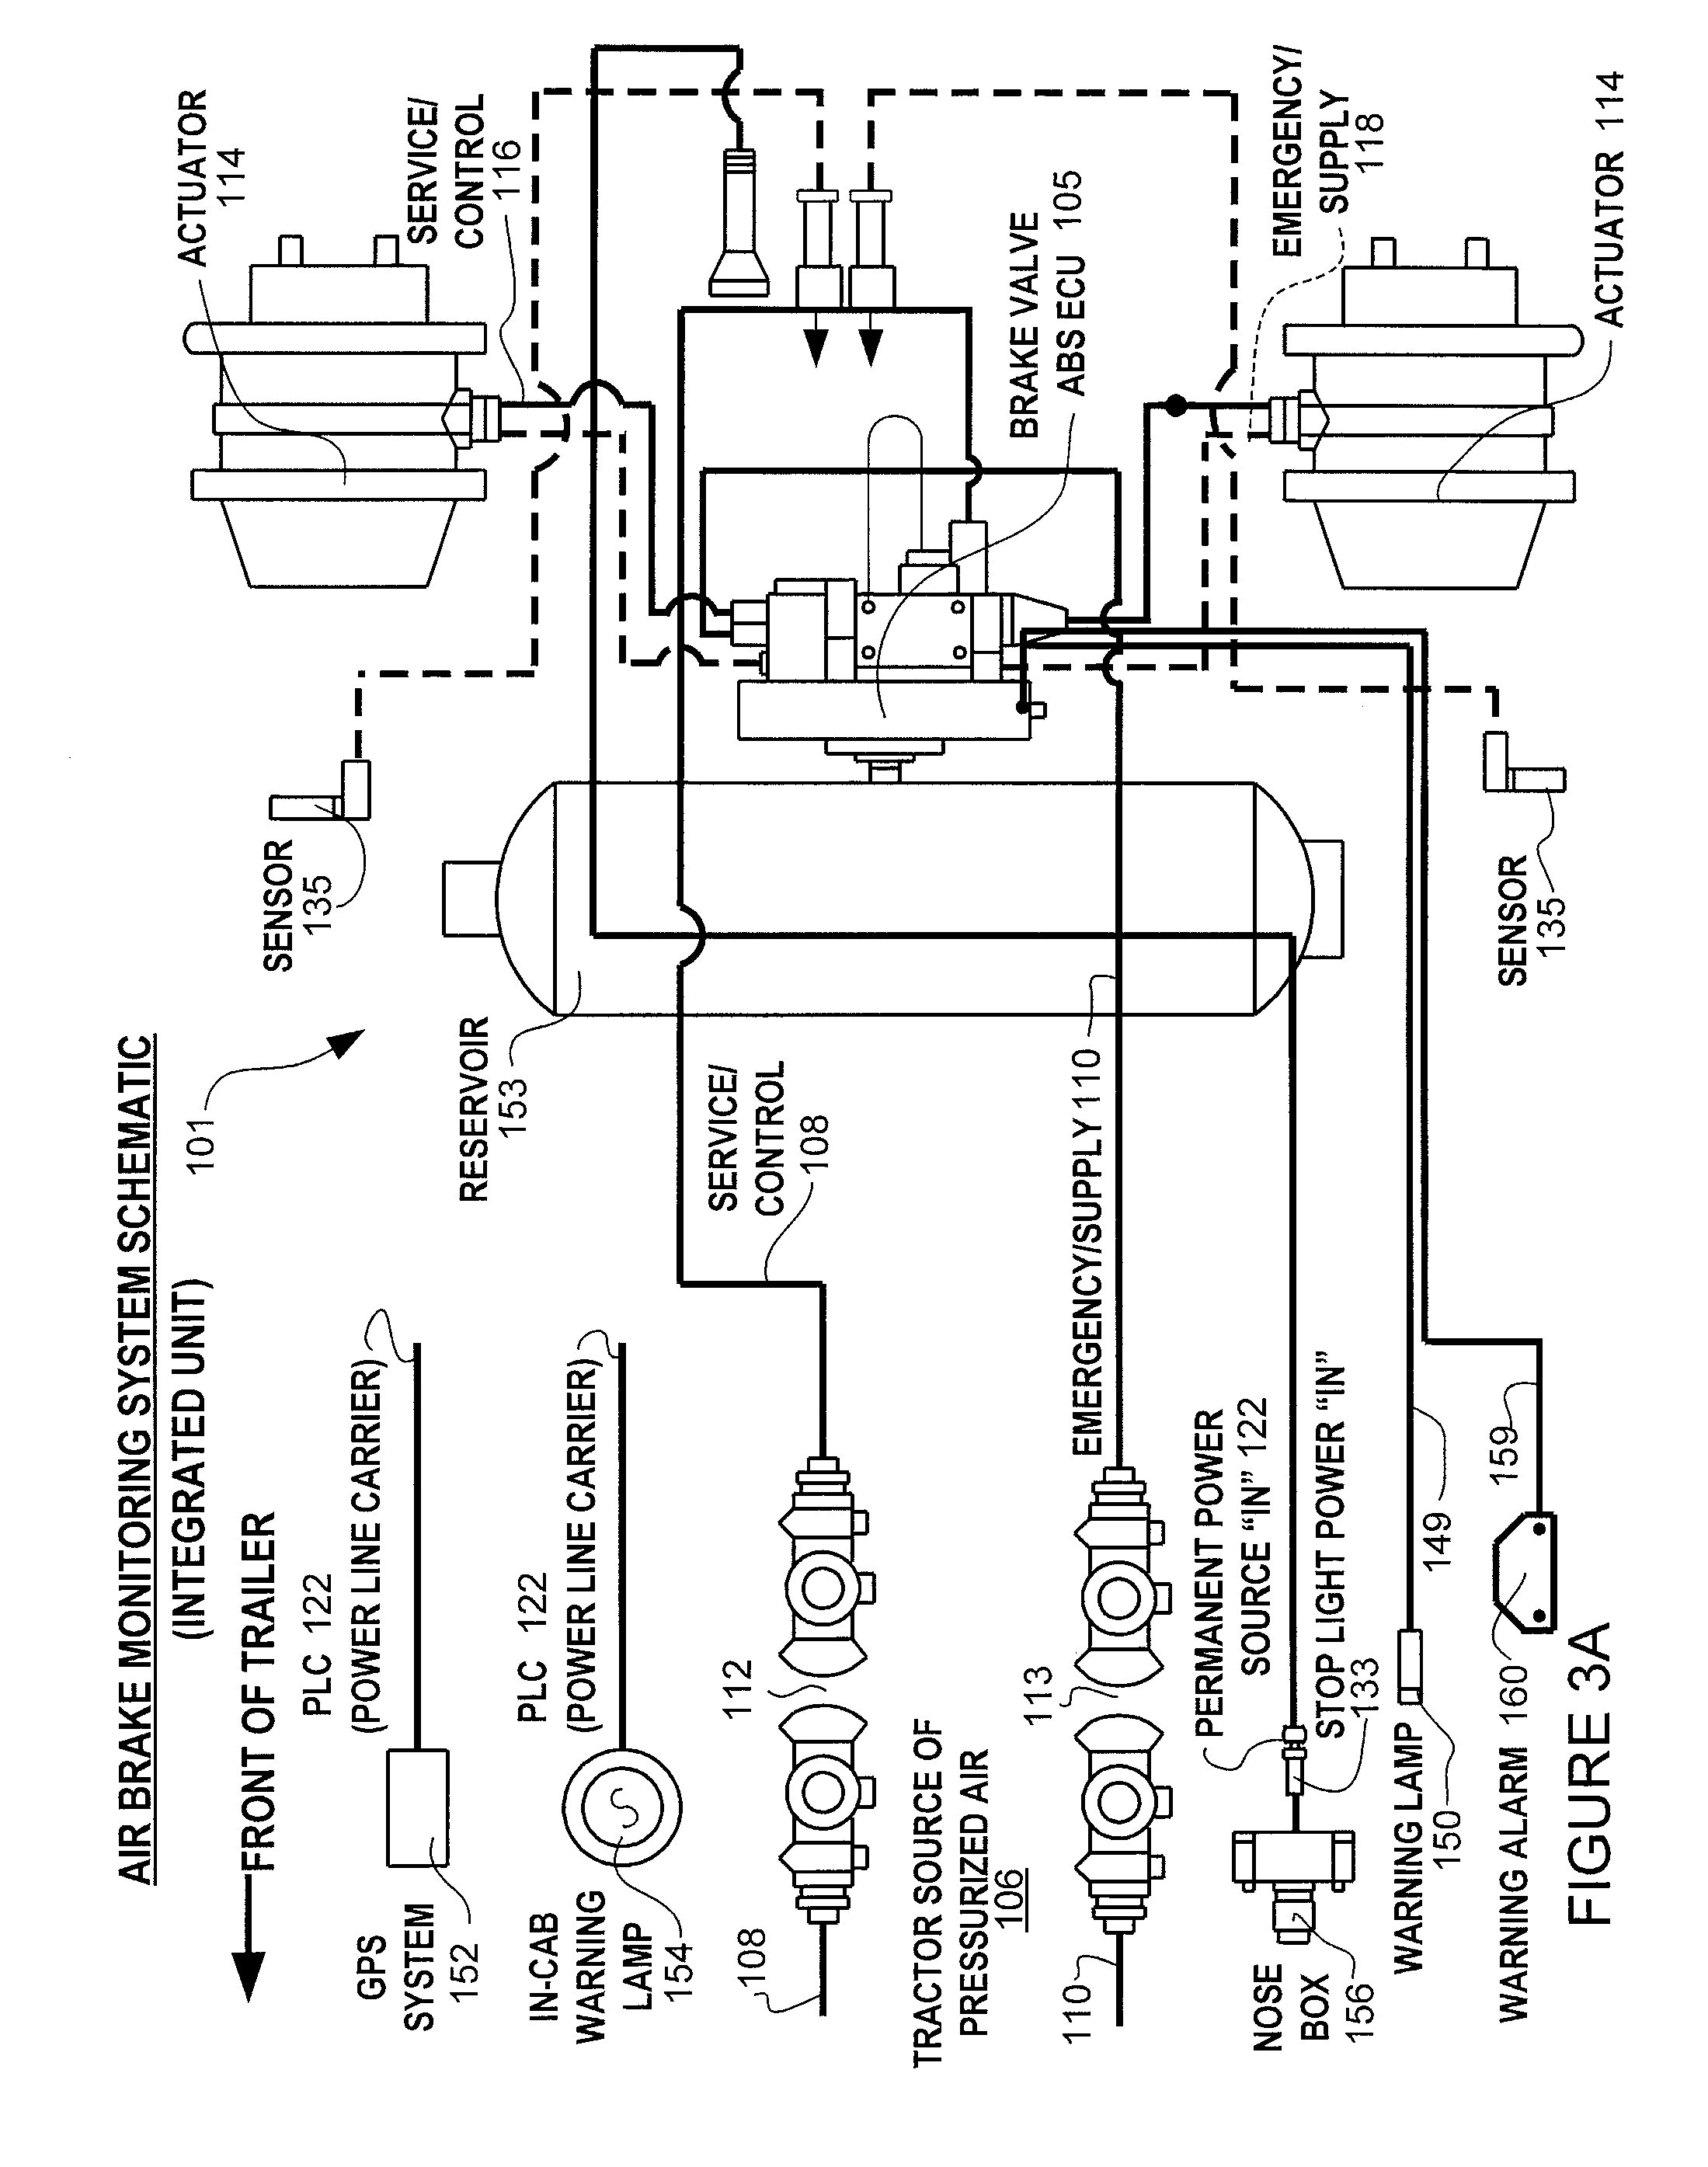 Abs System Diagrm Diagram] 99 Ranger Abs Wiring Diagram Full Version Hd Of Abs System Diagrm